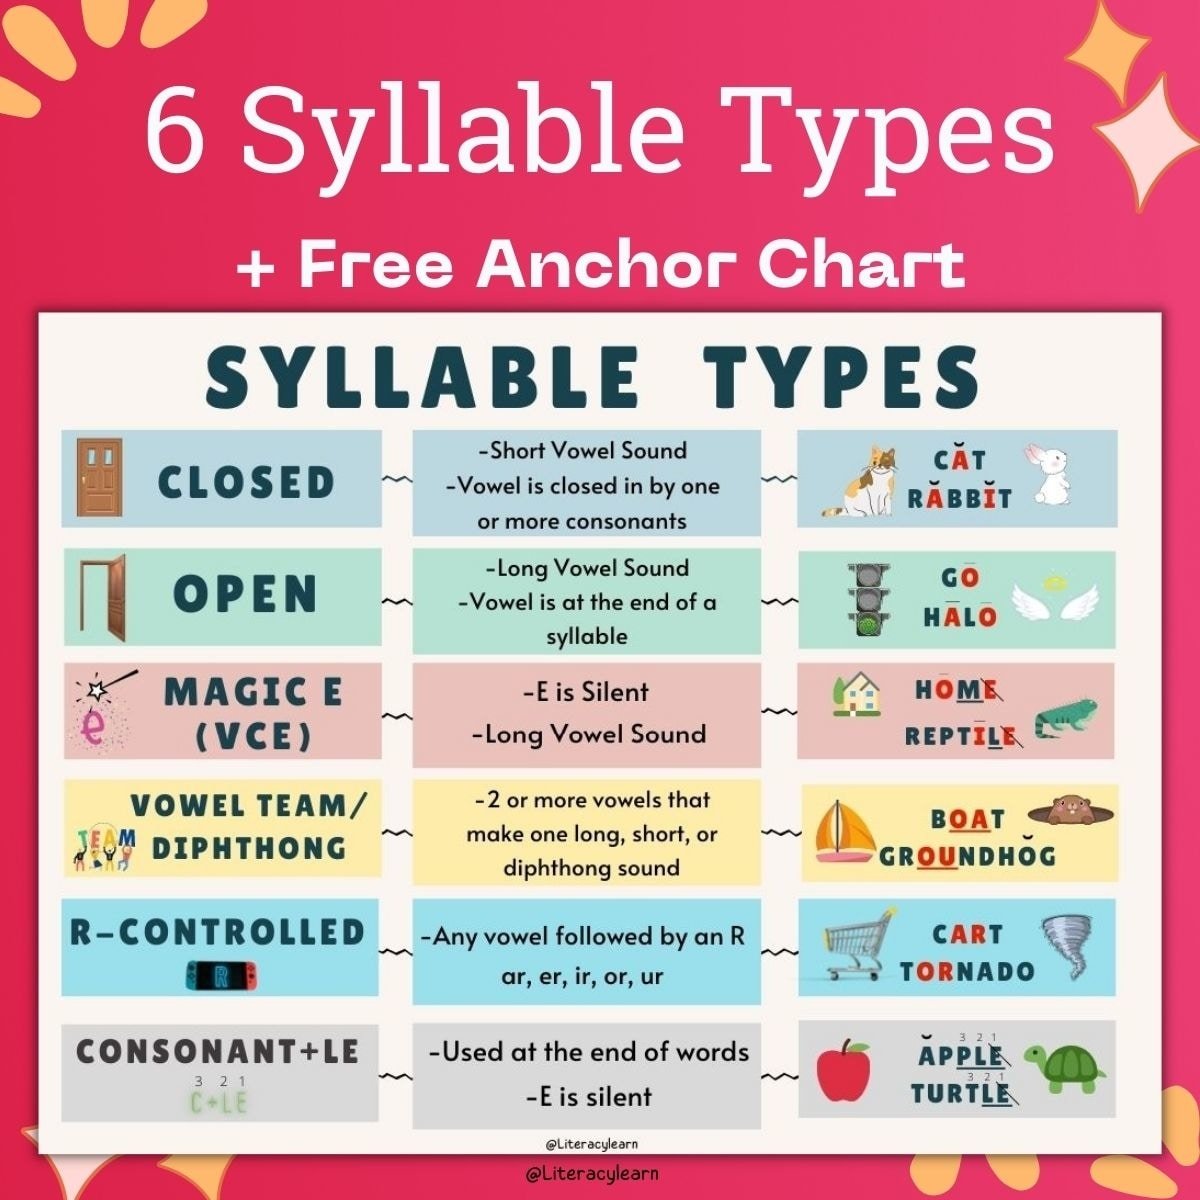 Pink graphic with the colorful 6 syllable types poster and anchor chart featured.